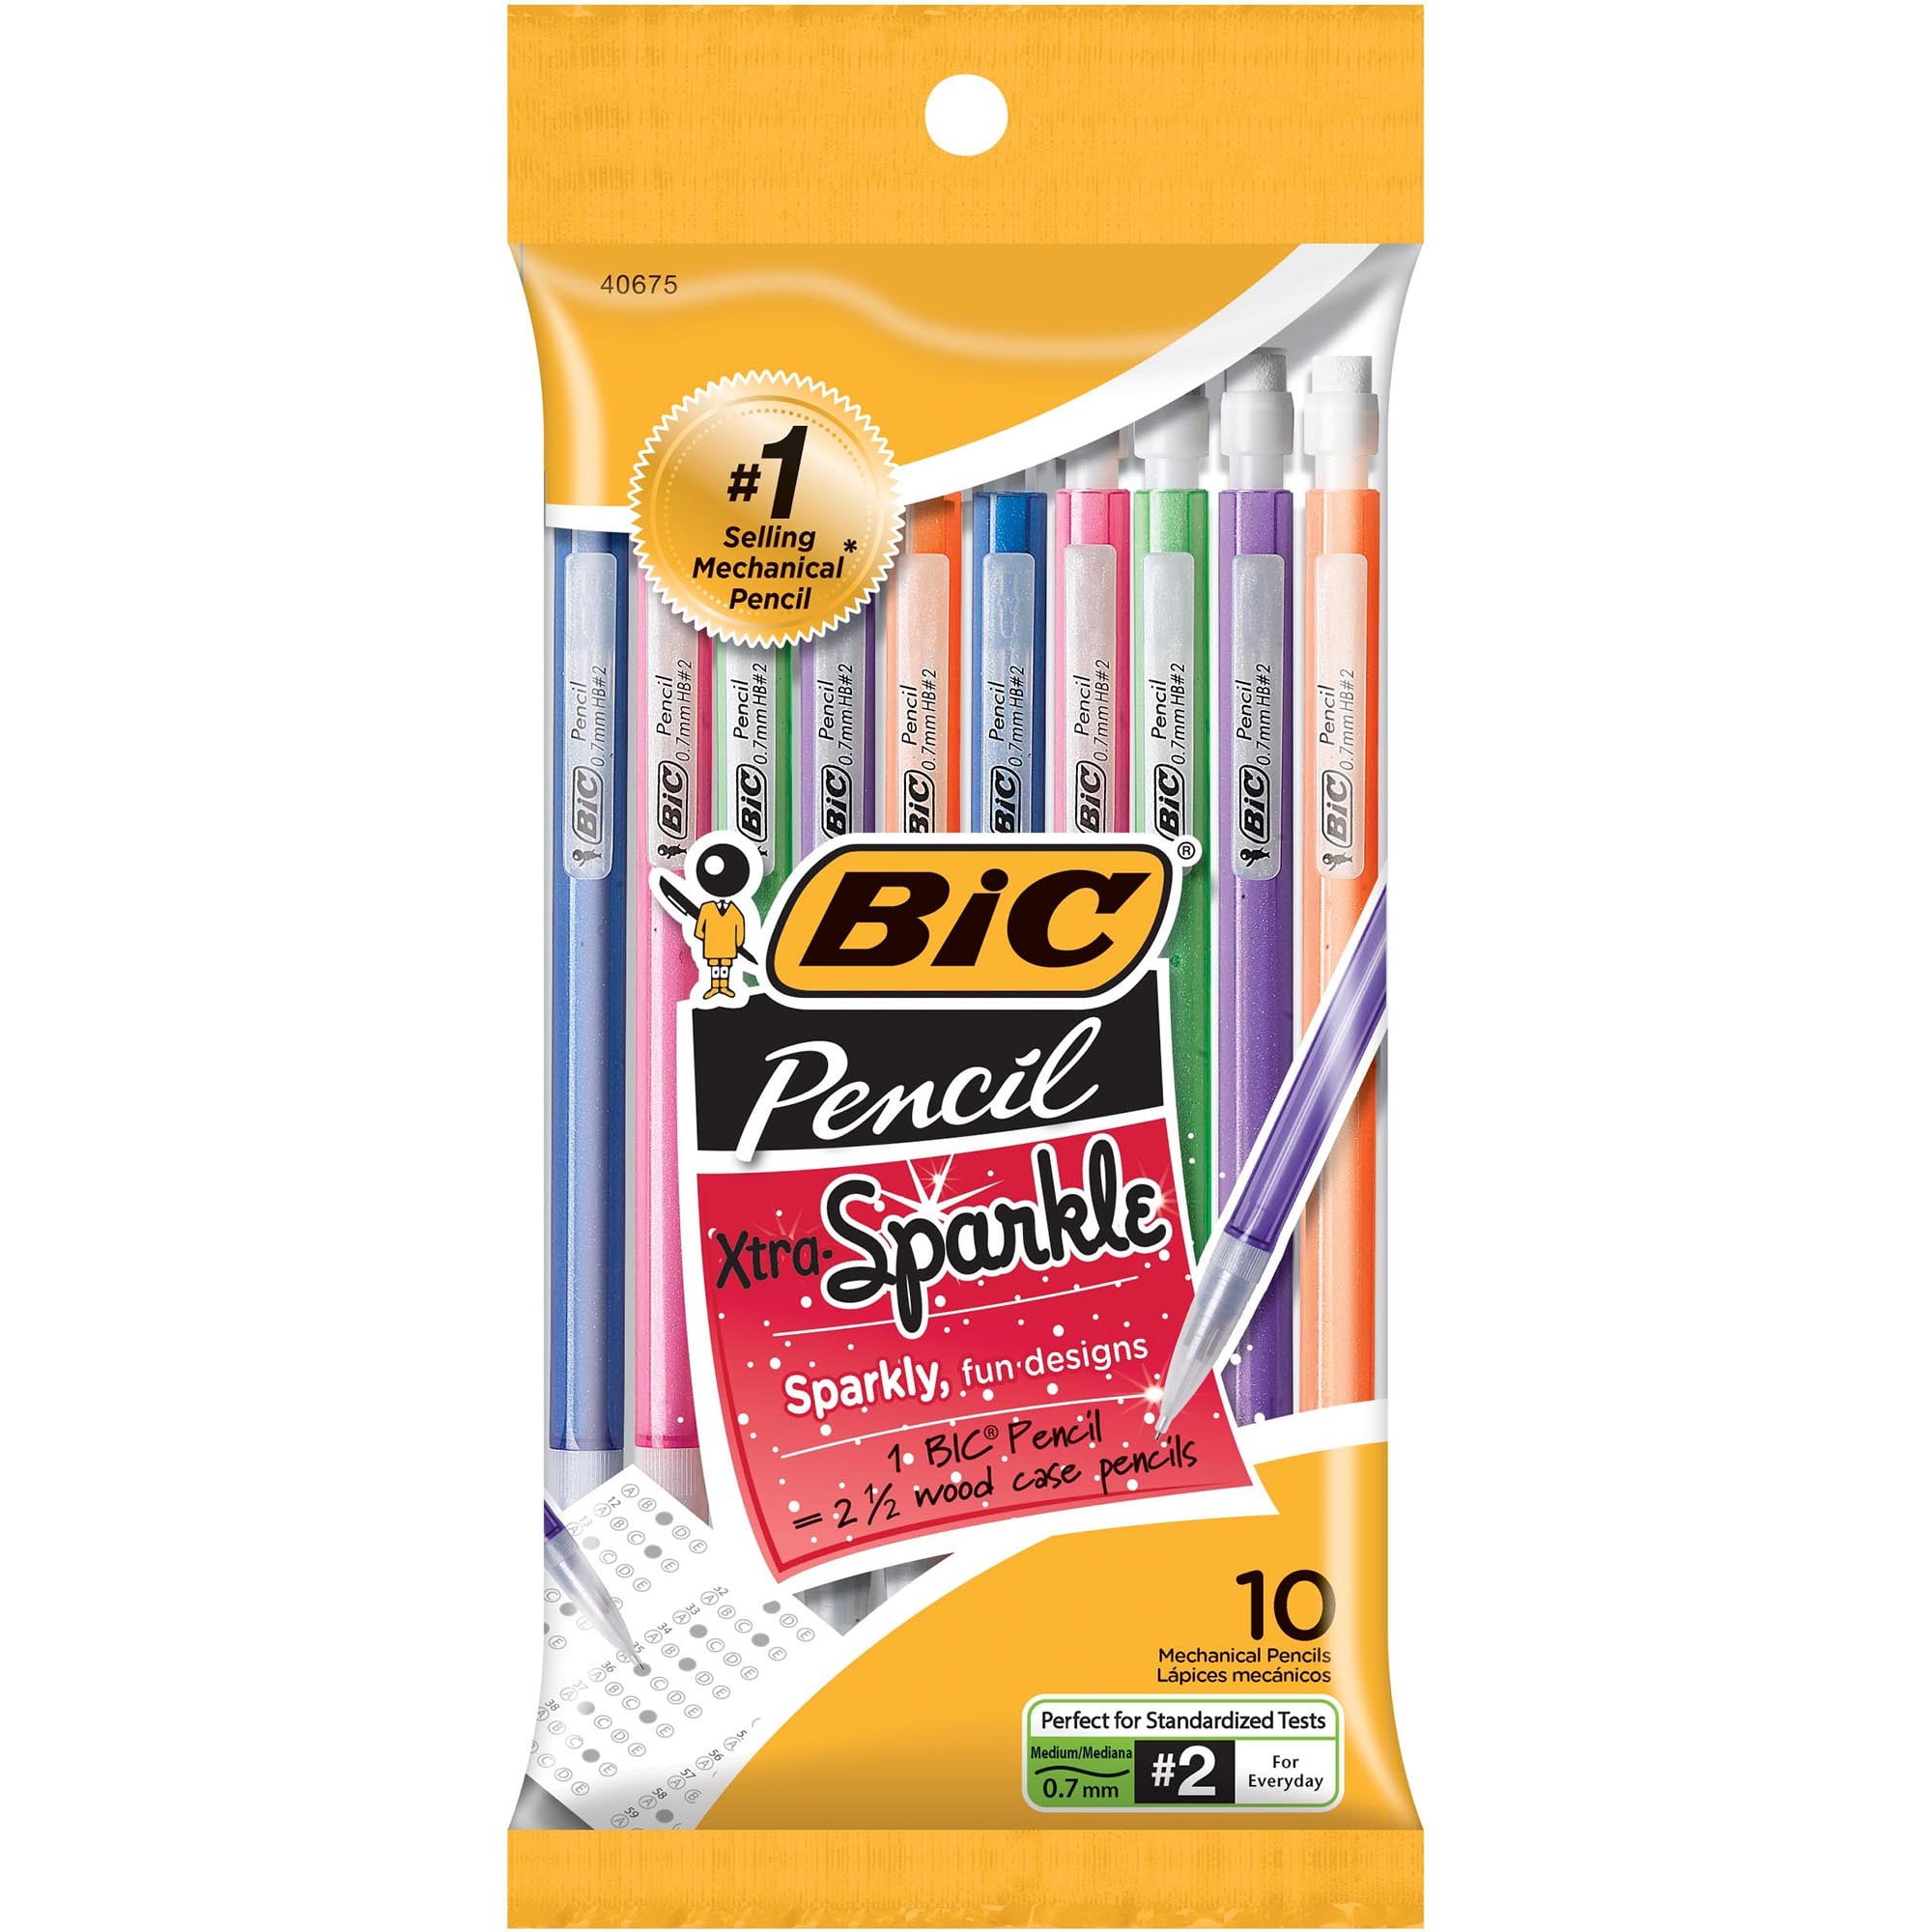 Xtra-Sparkle Mechanical Pencil 24-Count 0.7 mm Medium Point Refillable Design for Long-Lasting Use 2 Pack 24-Count 